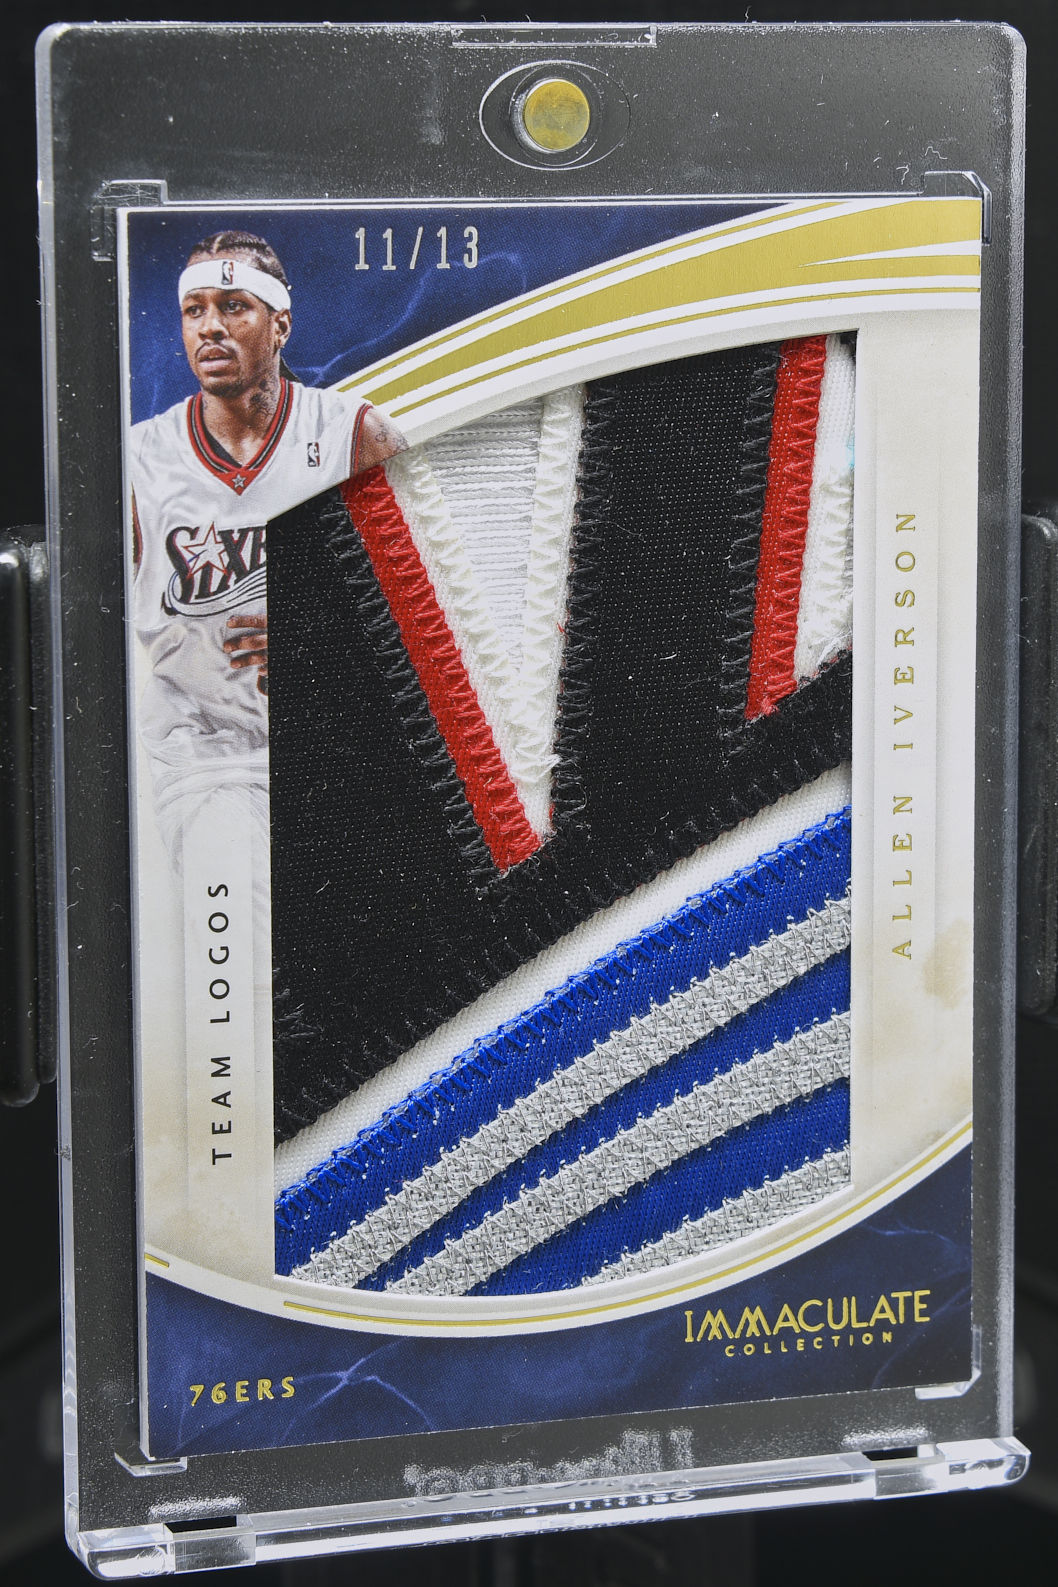 201516 IMMACULATE TEAM LOGOS PATCH ALLEN IVERSON 76ERS 1113 SUPER JUMBO PATCH